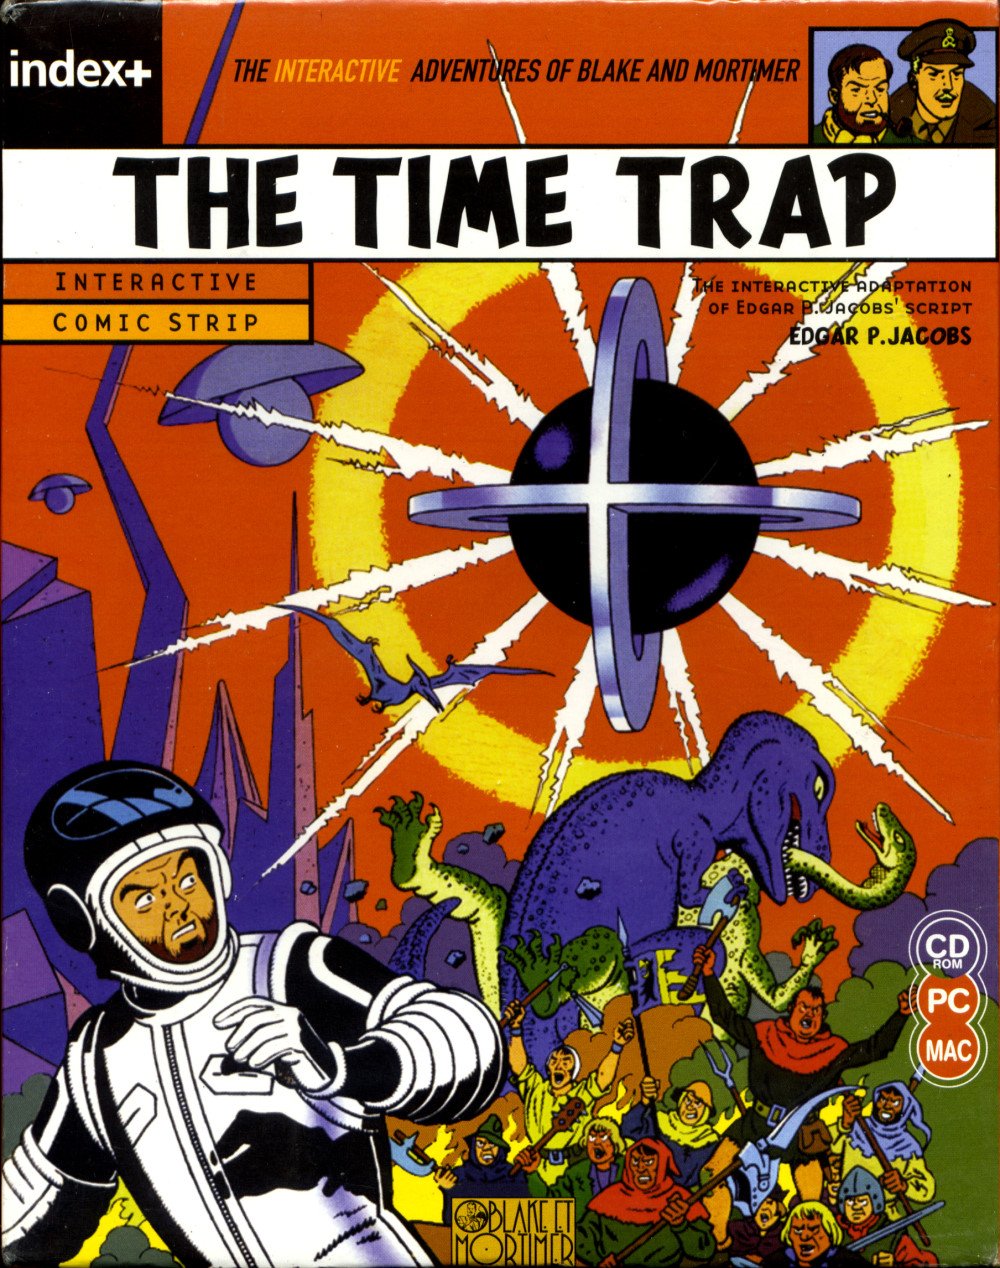 The Interactive Adventures of Blake and Mortimer : The Time Trap